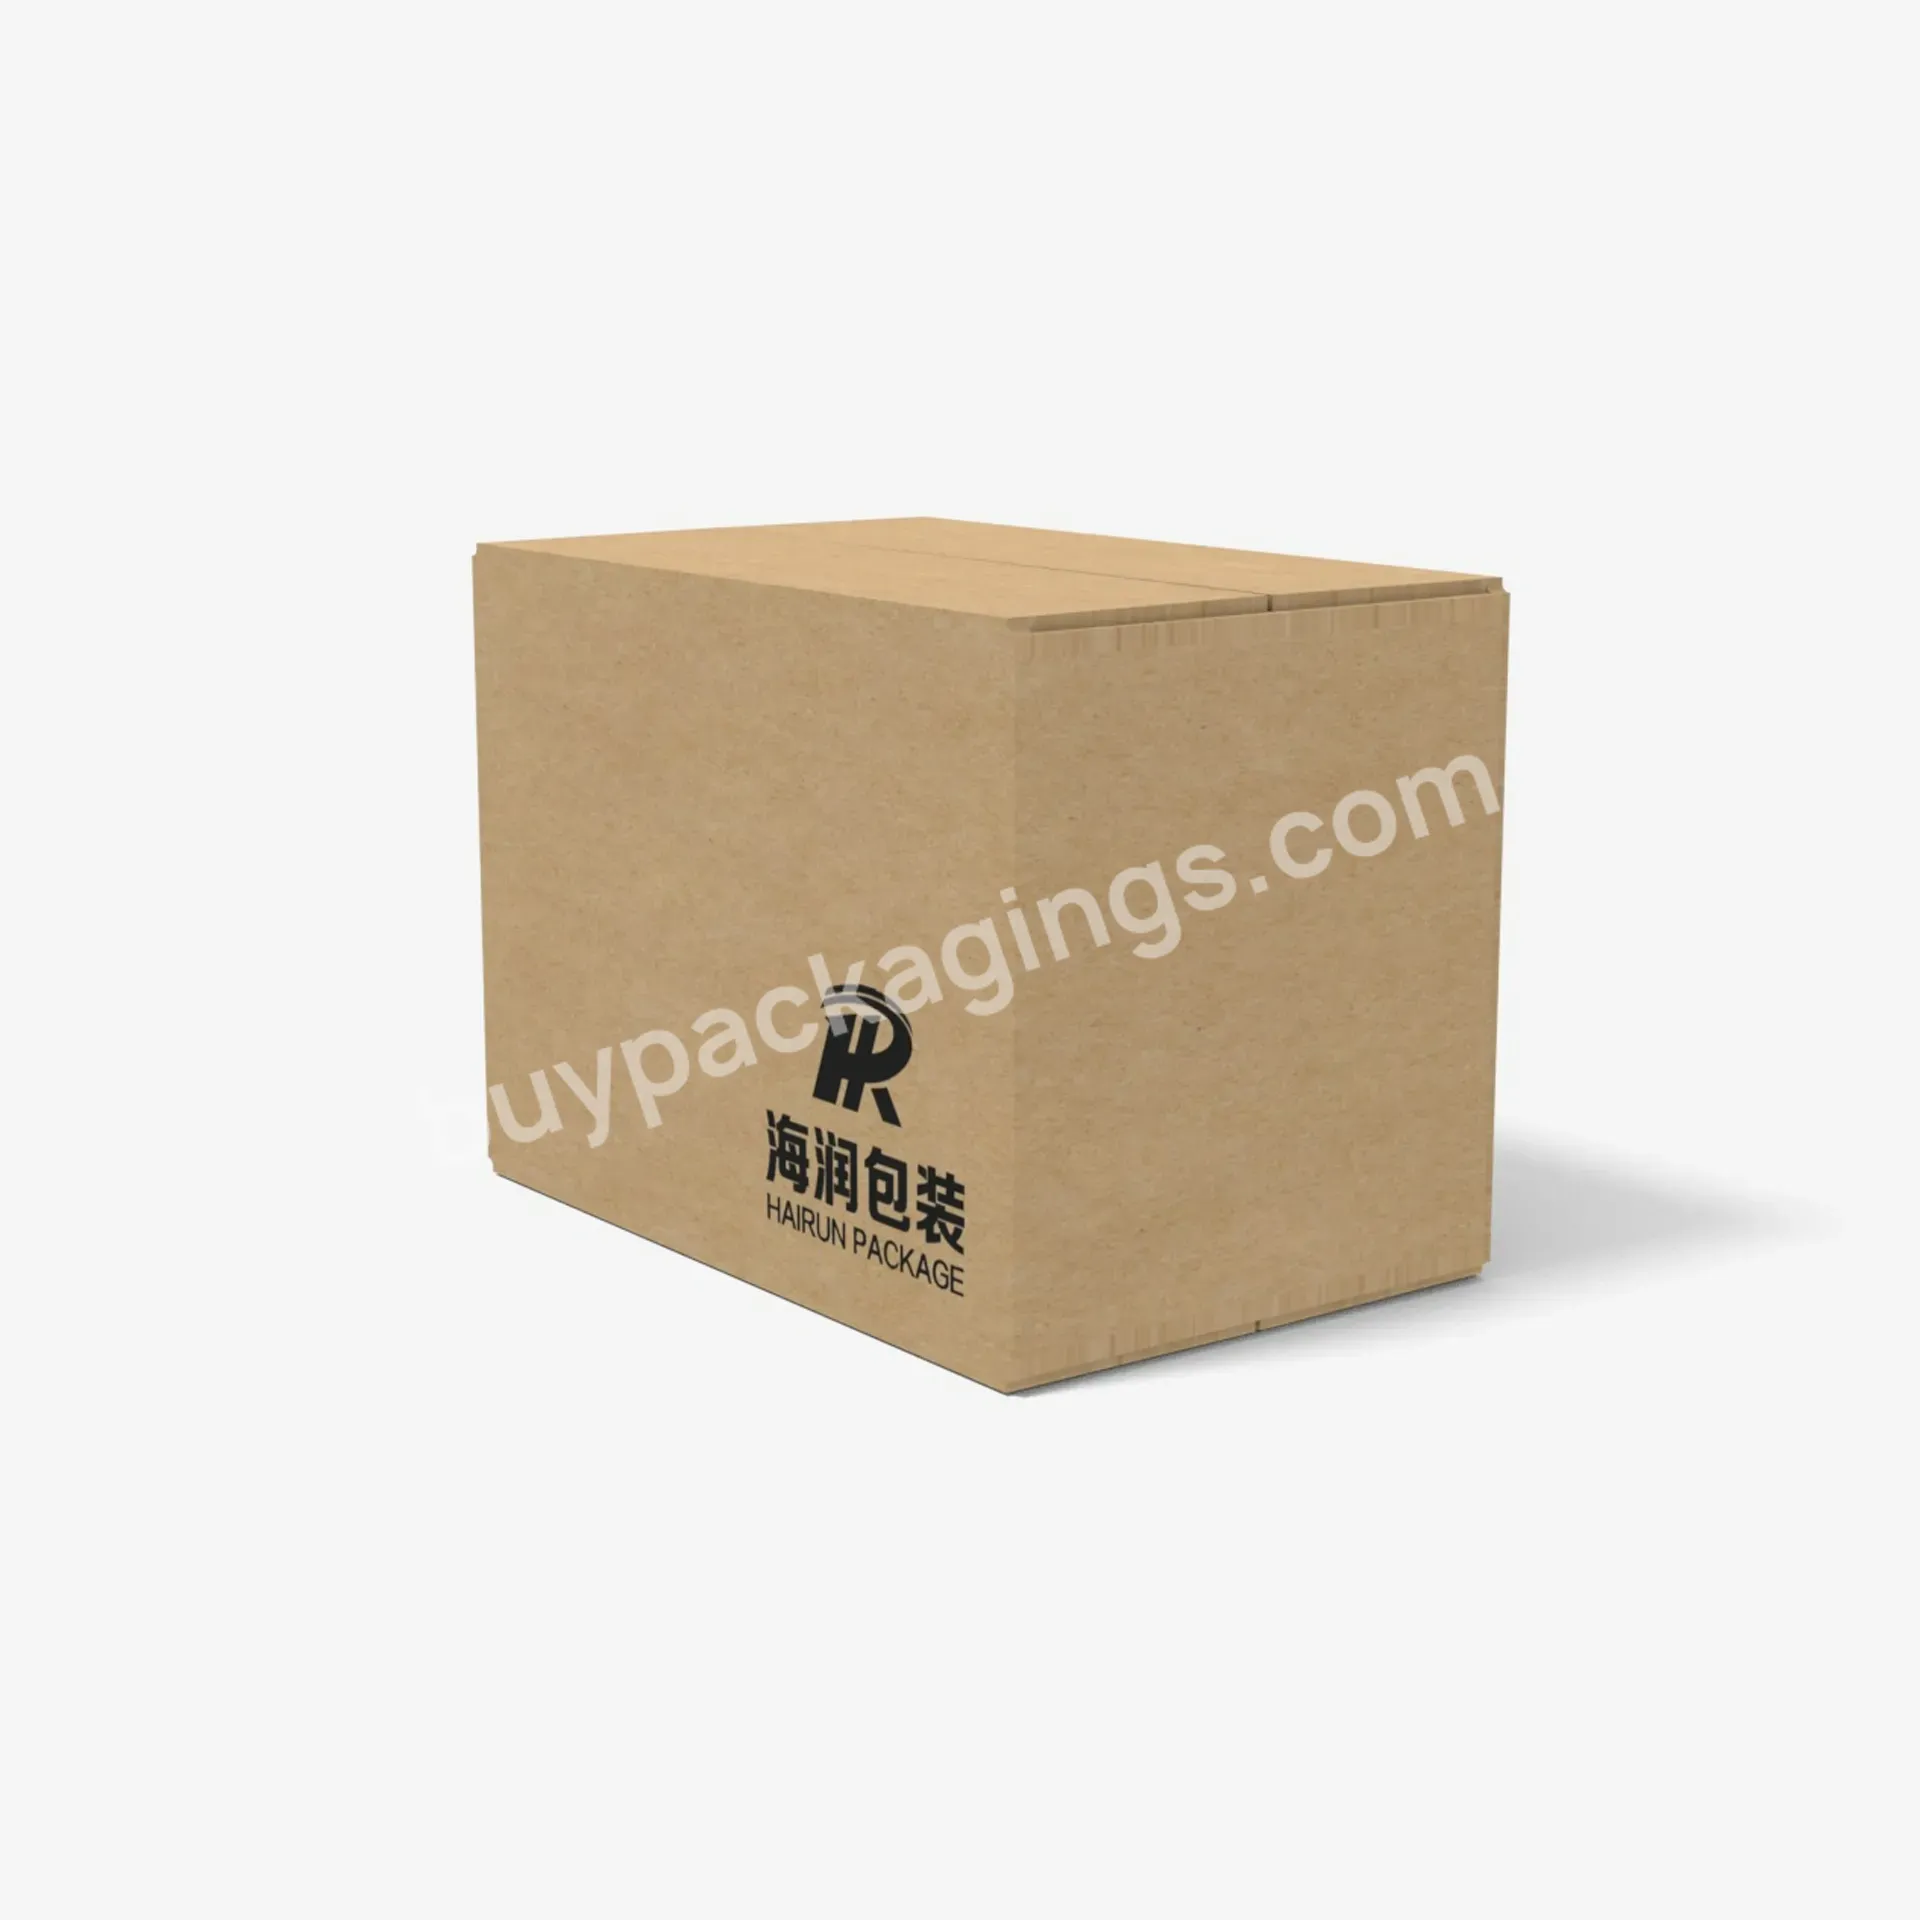 2021 Small Size Personalised Design Recycle Carton Packaging Paper Boxes - Buy Carton Boxes Personalised Design Paper Boxes,Recycle Carton Paper Boxes,Small Size Carton Packaging Paper Boxes.